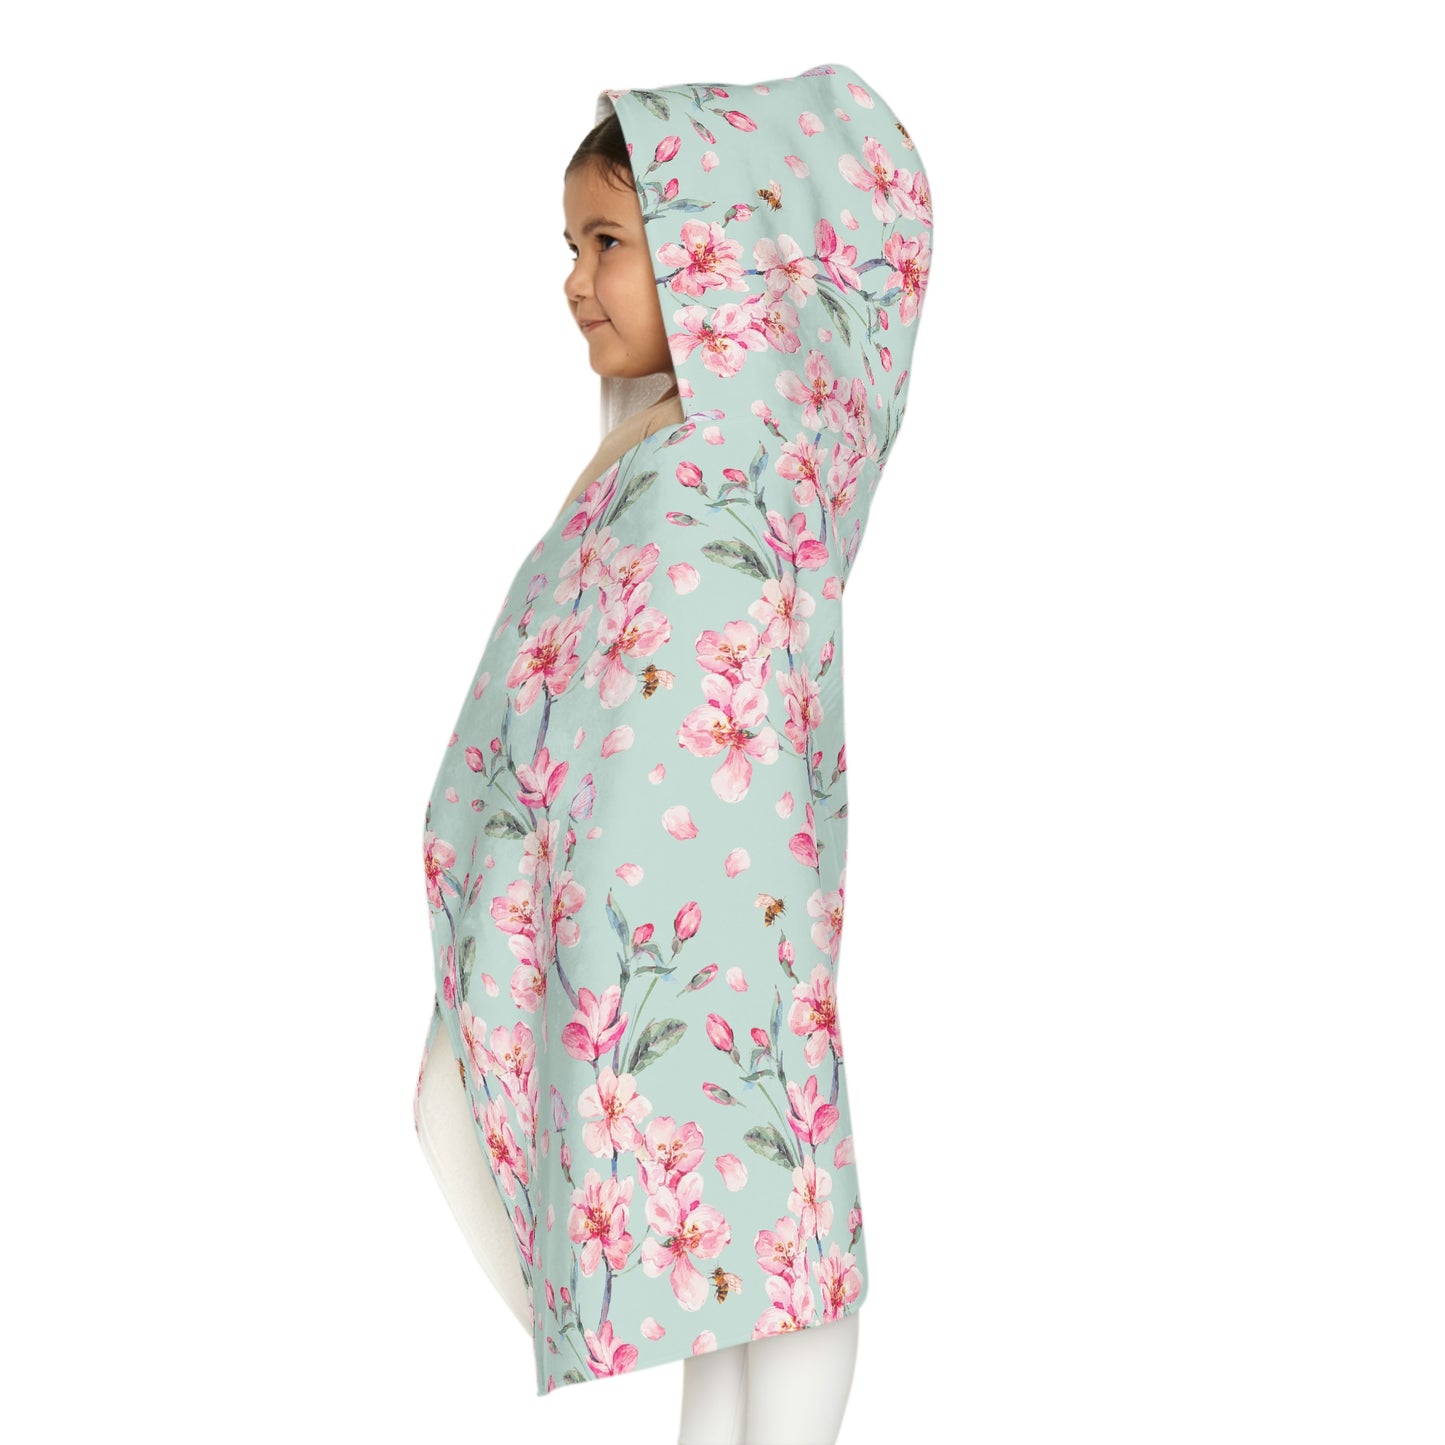 Cherry Blossoms and Honey Bees Youth Hooded Towel